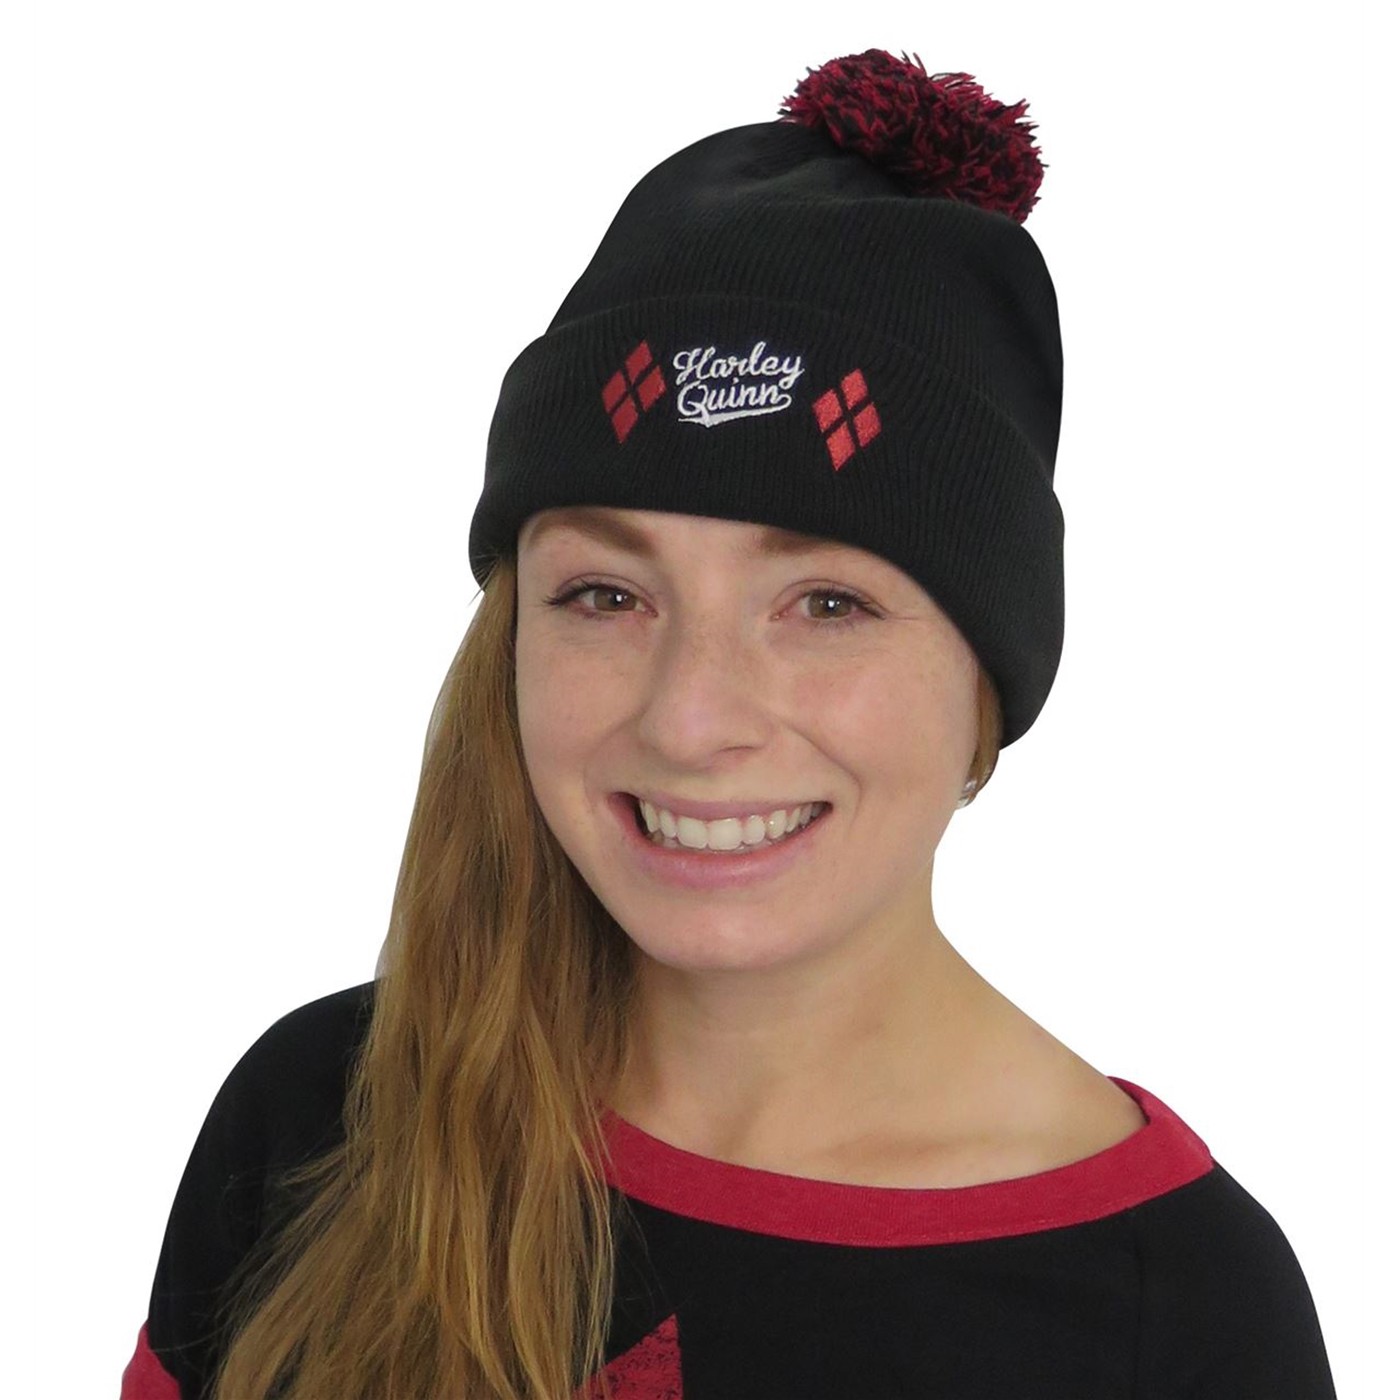 Harley Quinn Athletic Women's Sweater with Beanie